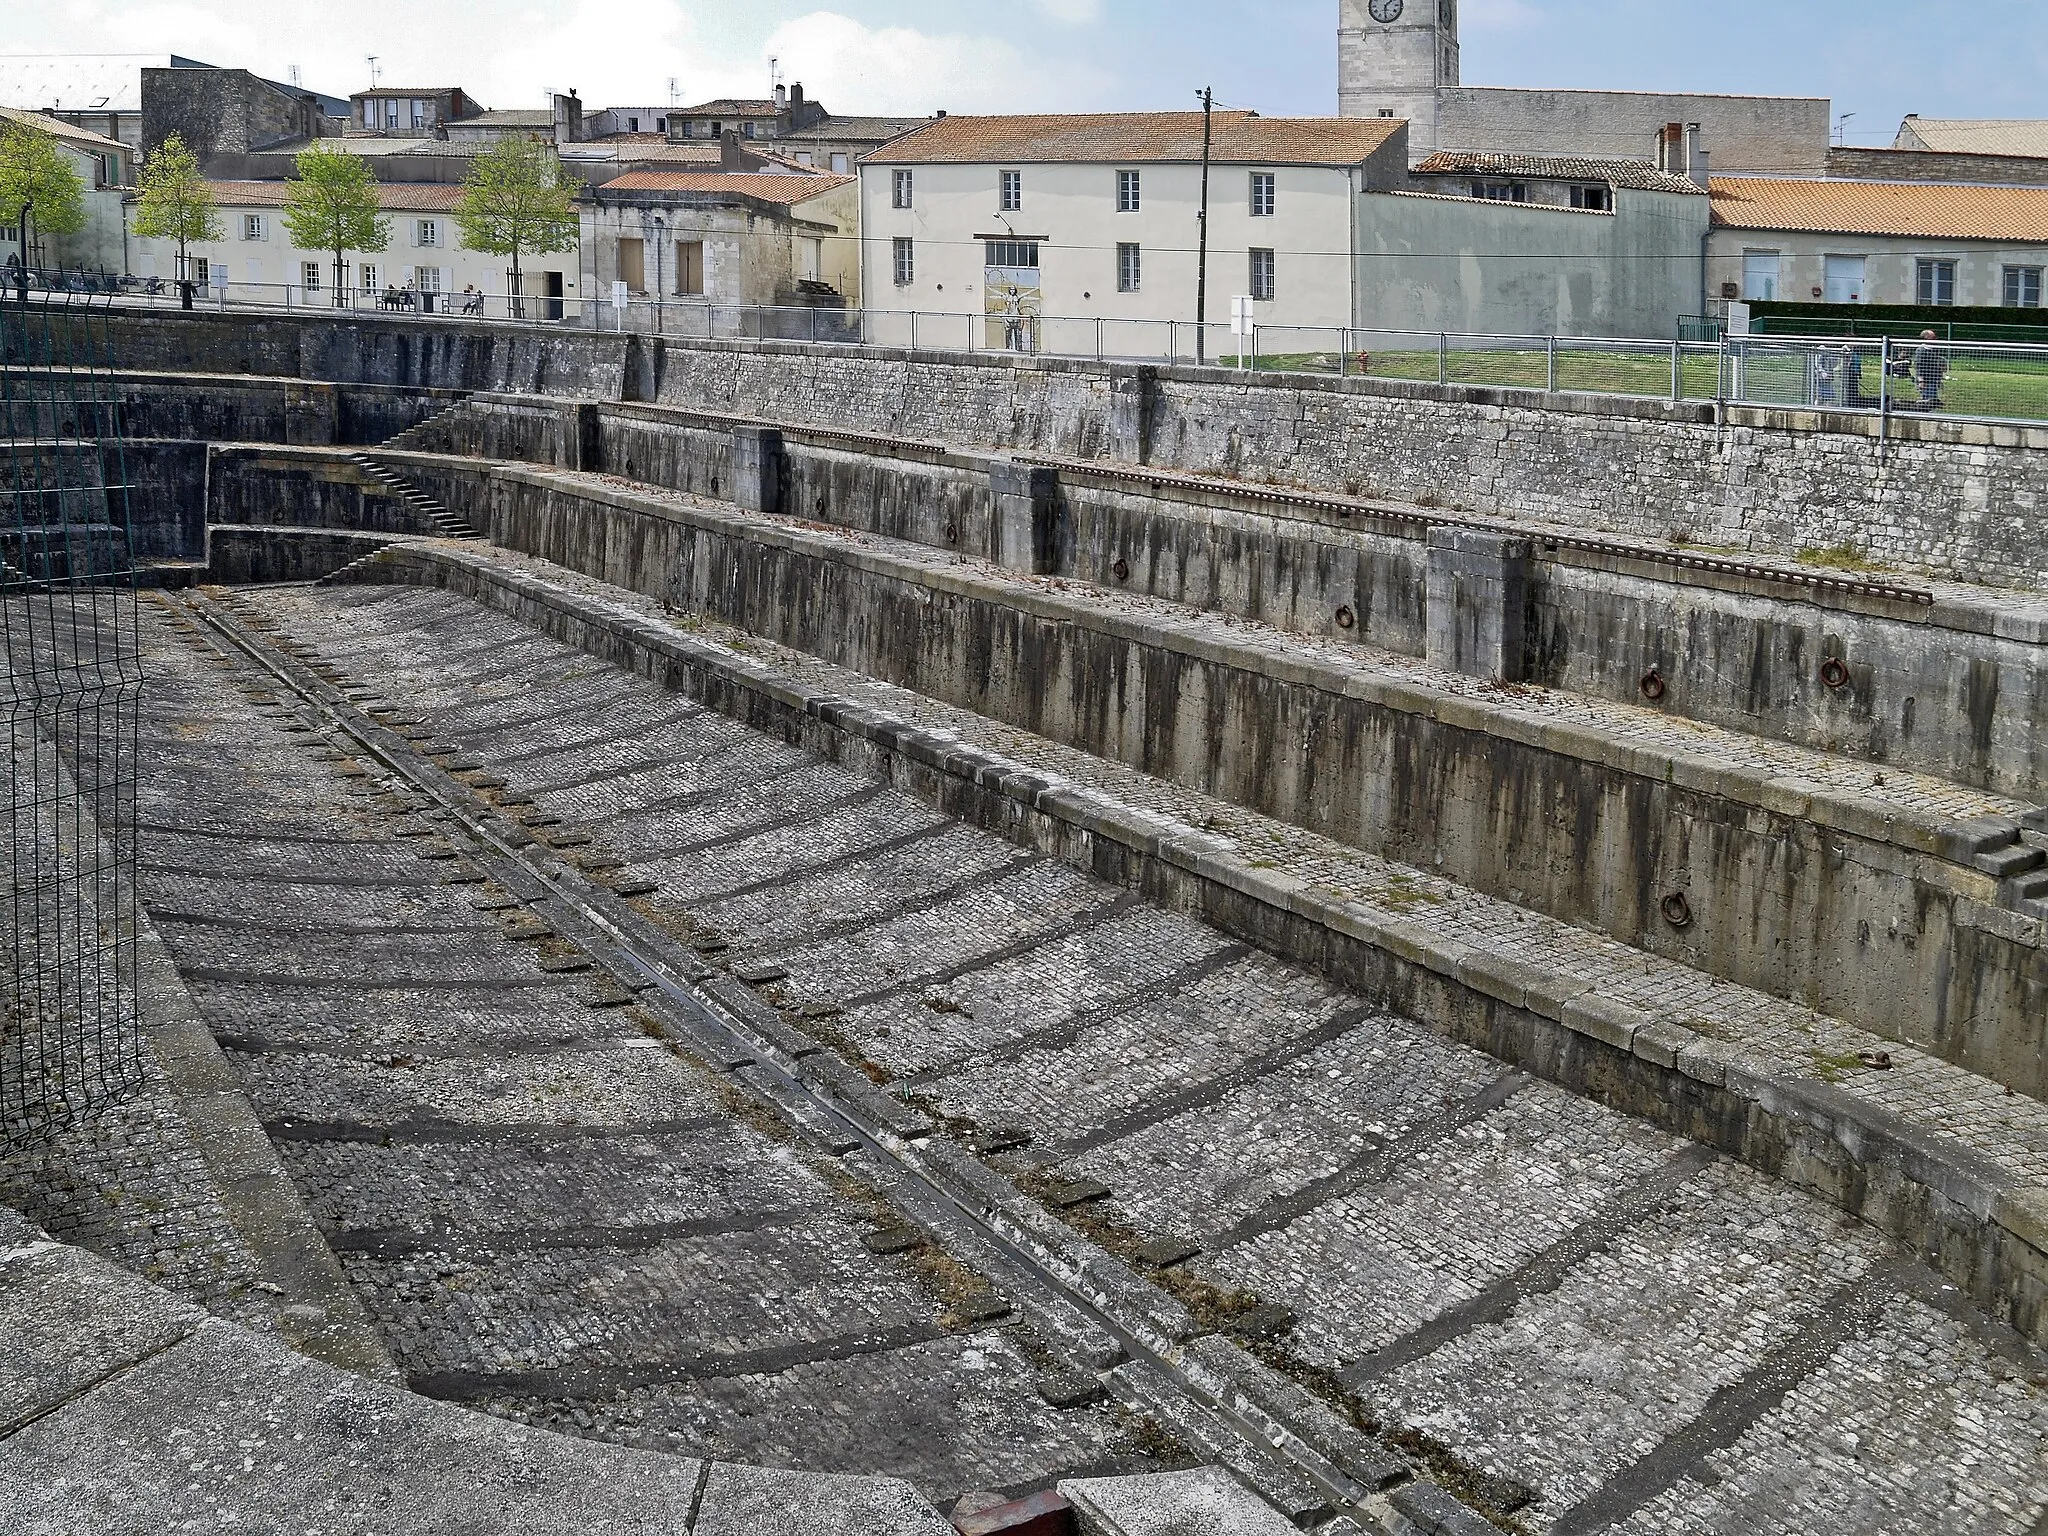 Photo showing: Rochefort (Charente-Maritime, France) - One of the the original twin dry docks known as or the “double forme” or the “Louis XV Dry Dock”, designed in the 17th century.